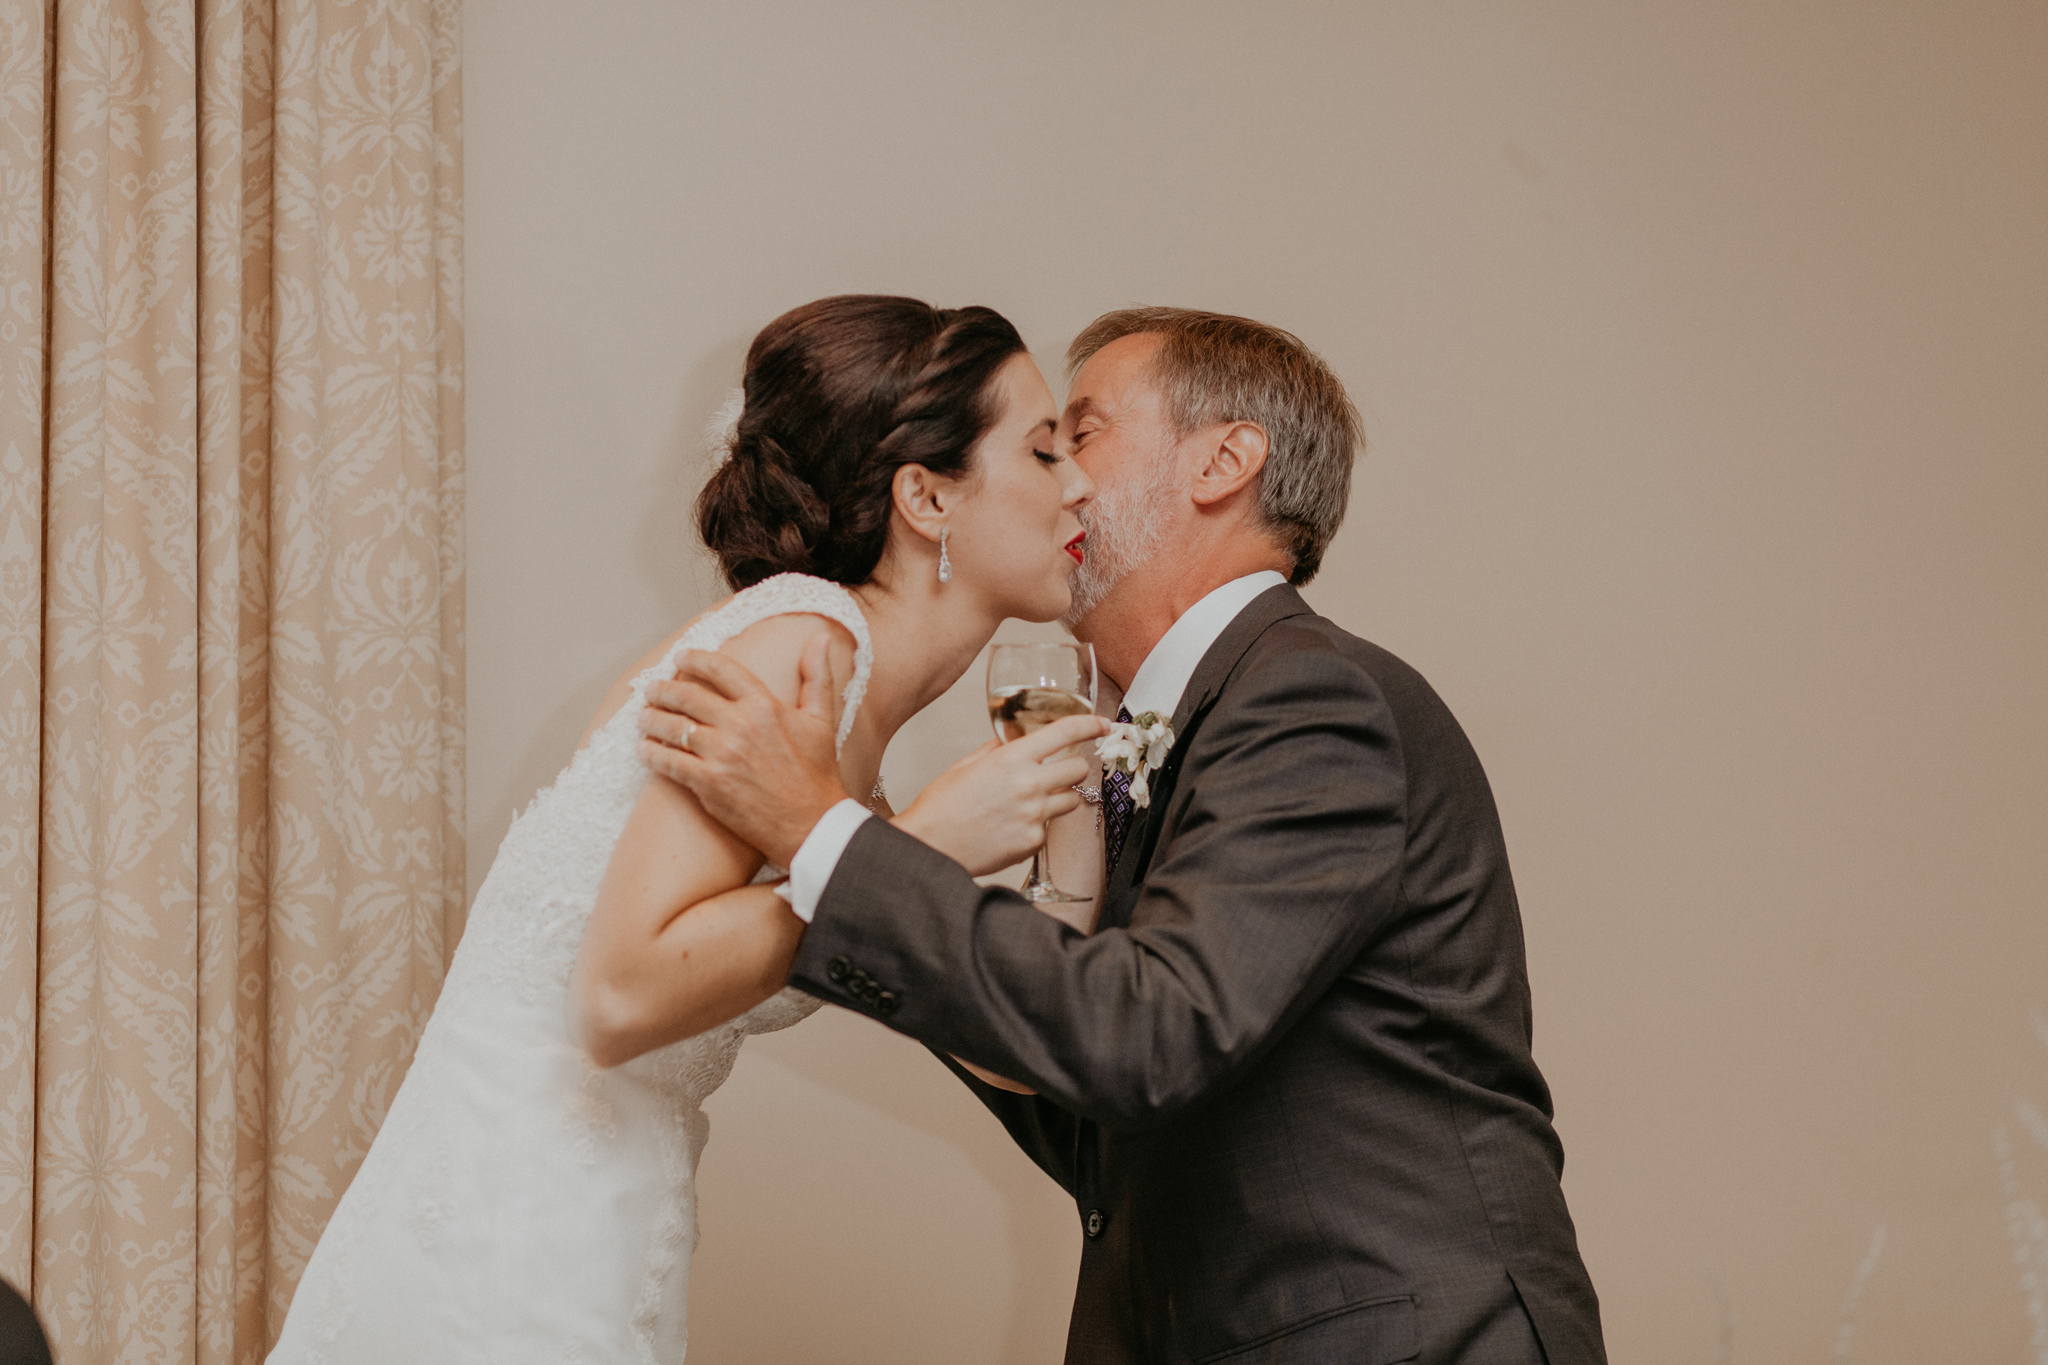 Bride kisses father after wedding speech in documentary wedding photo